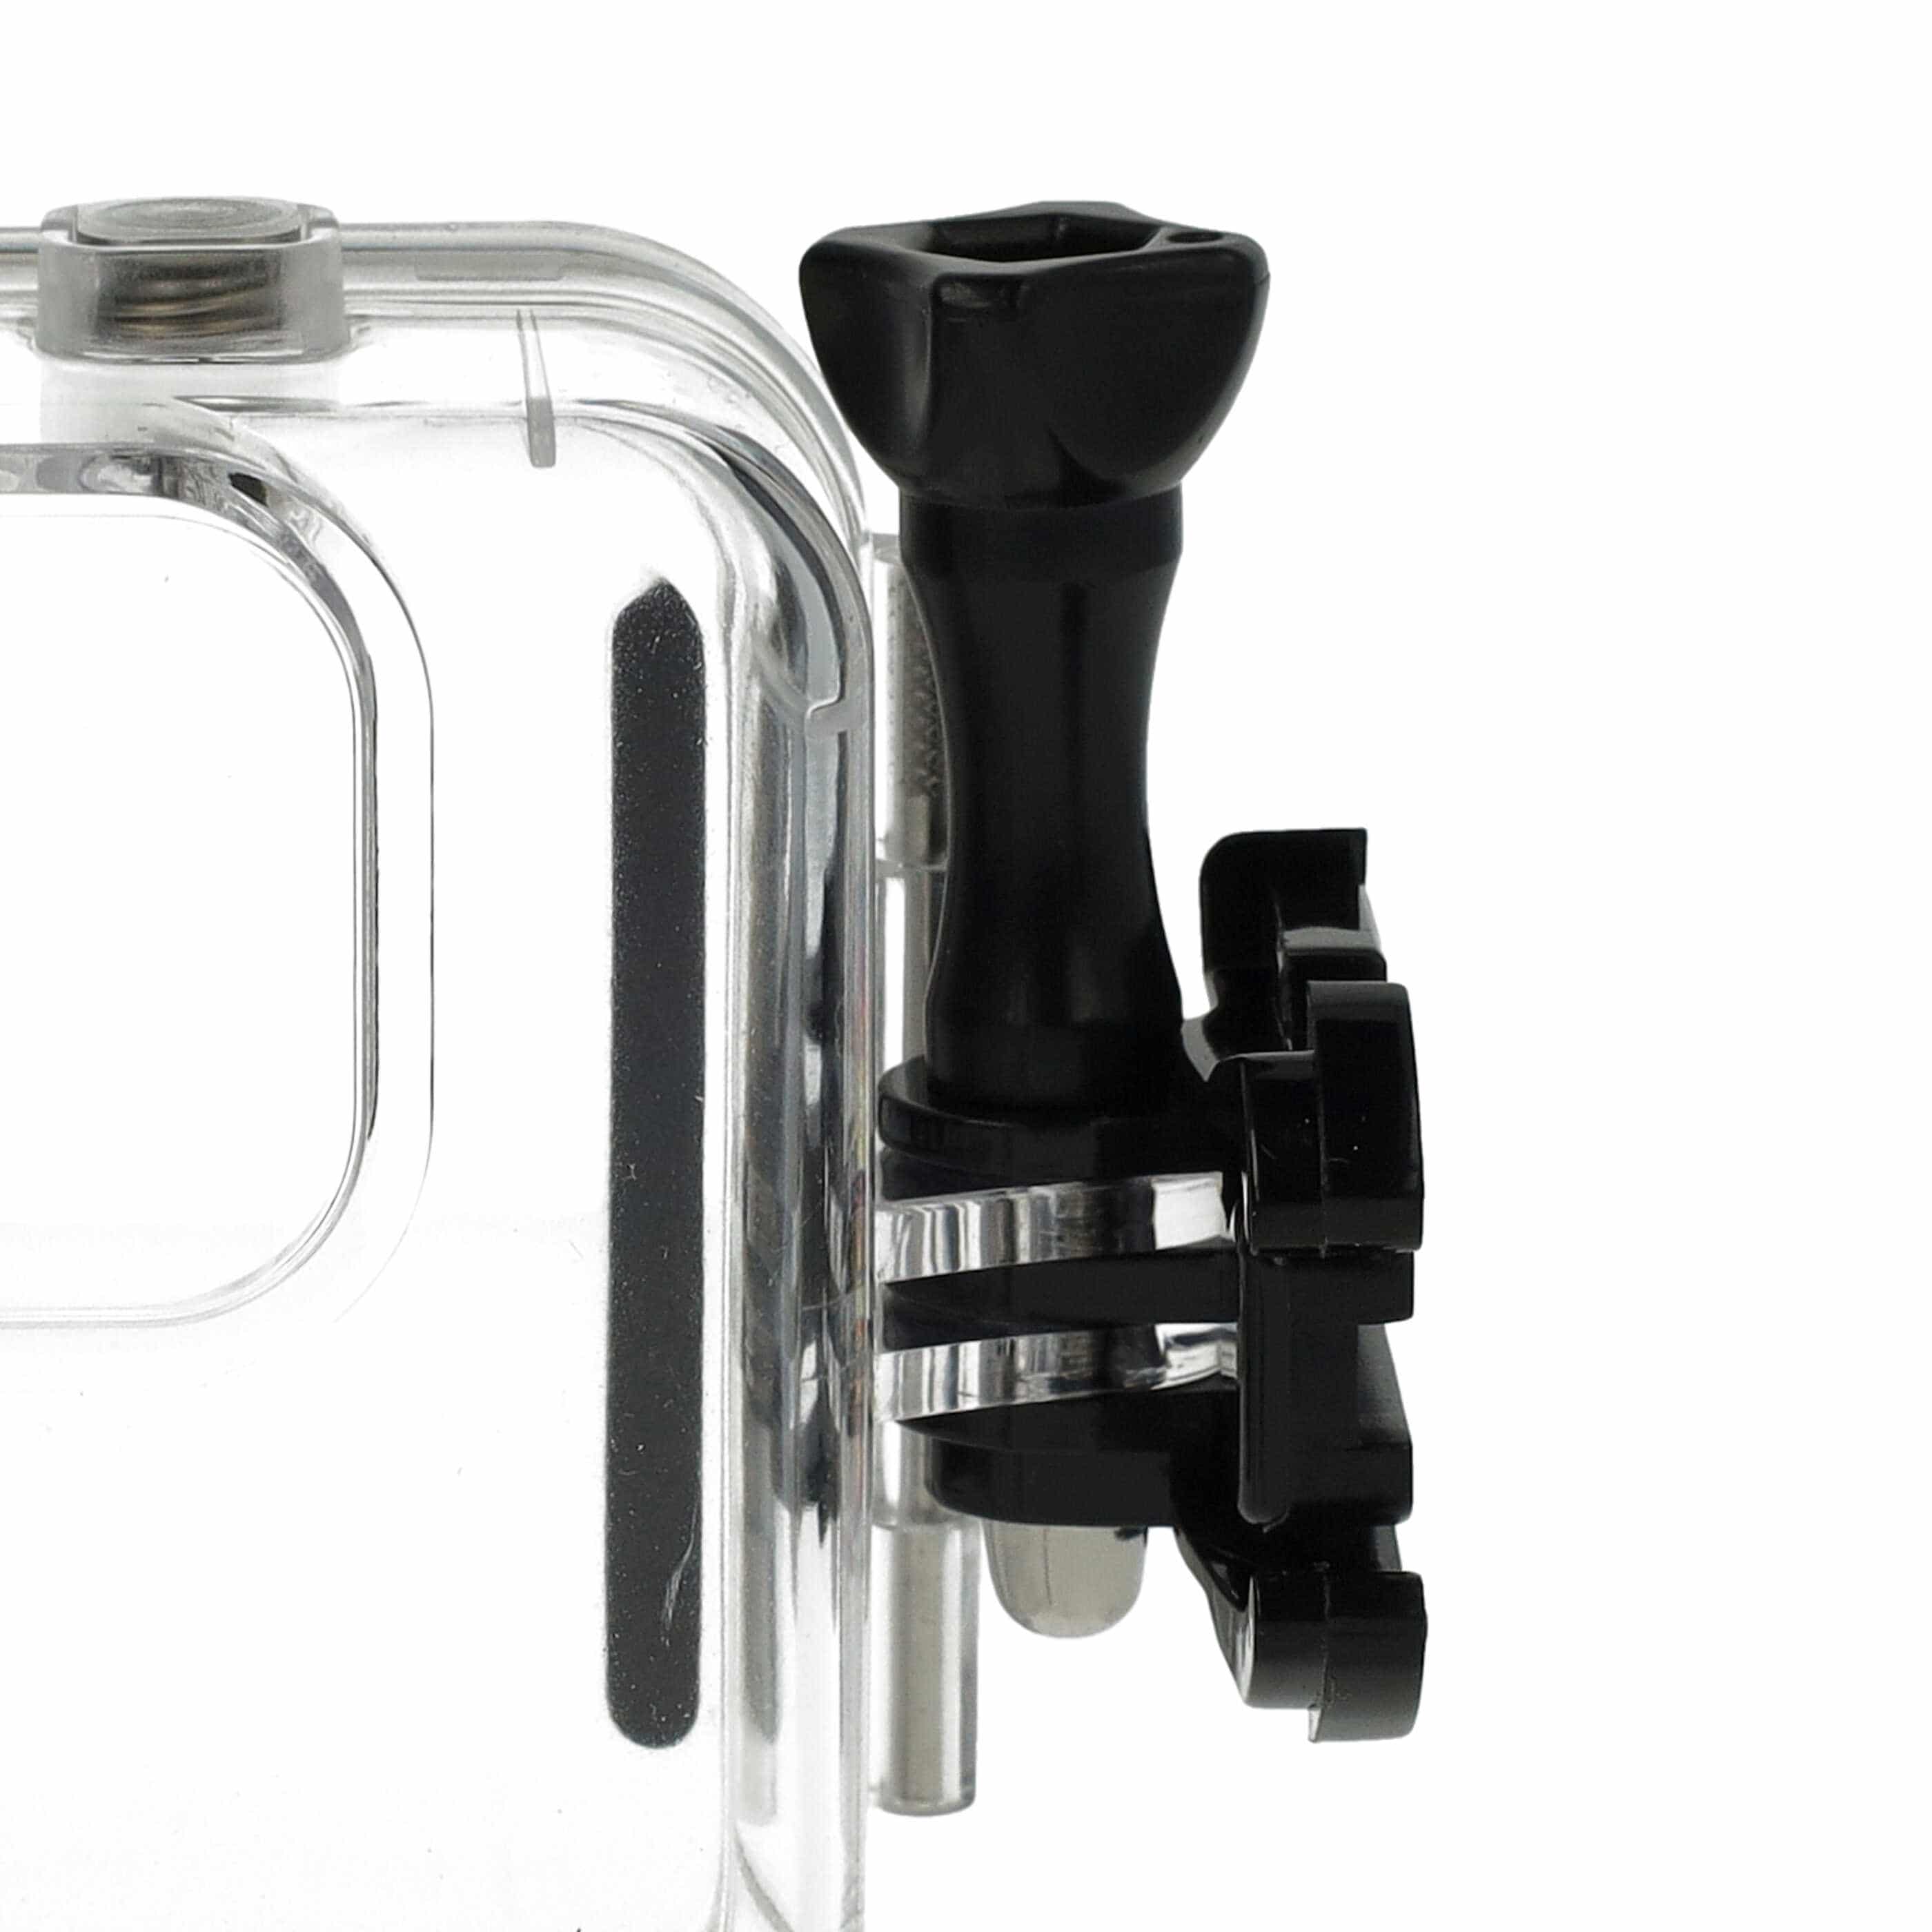 Underwater Housing suitable for GoPro Hero 10, 11, 9 Action Camera - Up to a max. Depth of 60 m